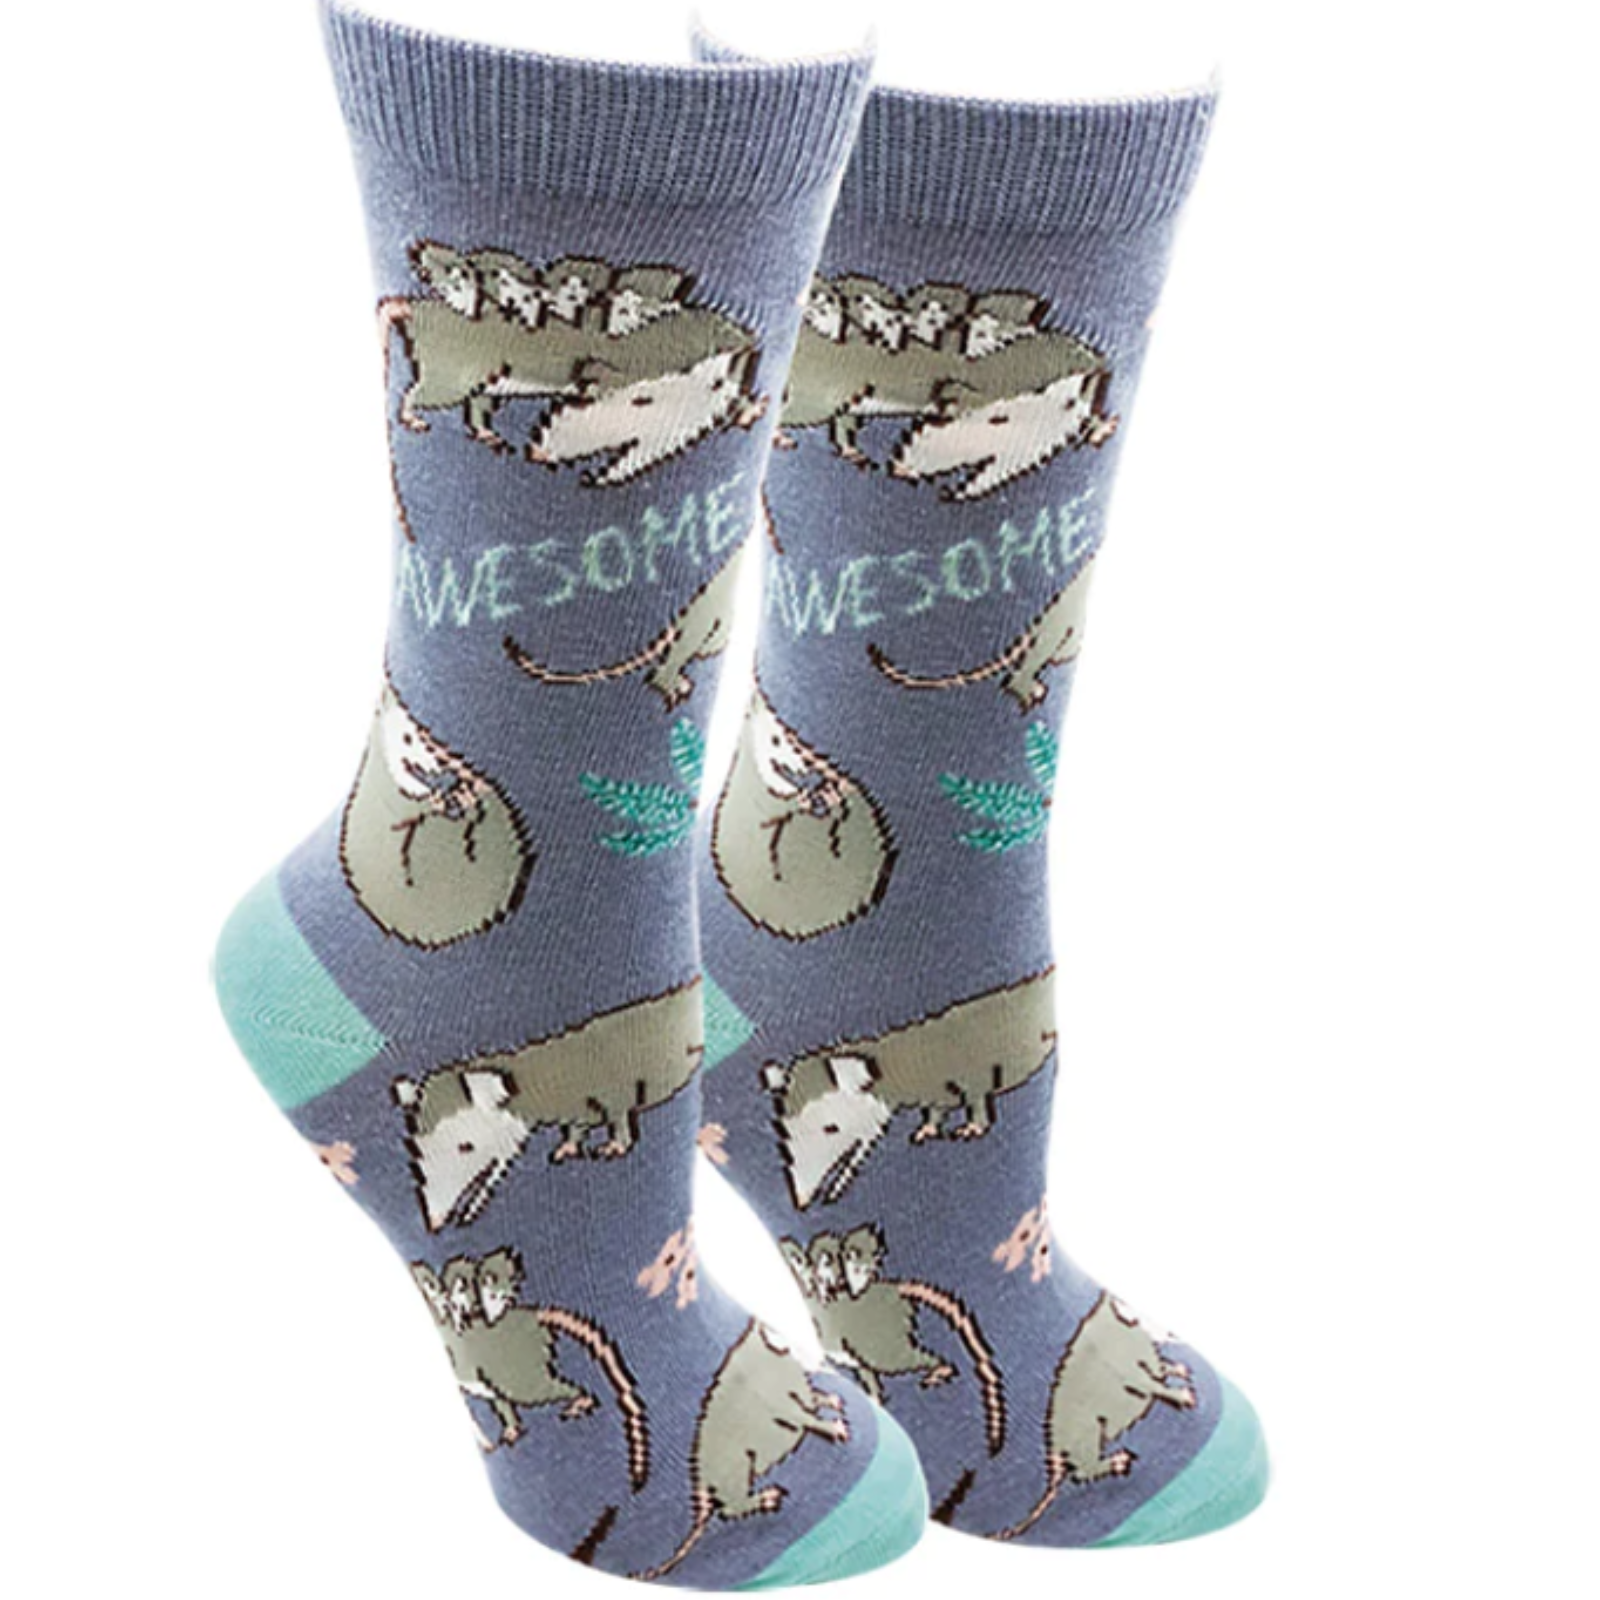 Sock Harbor Awesome Possum women's crew sock featuring purple sock with possums and Awesome Possum written